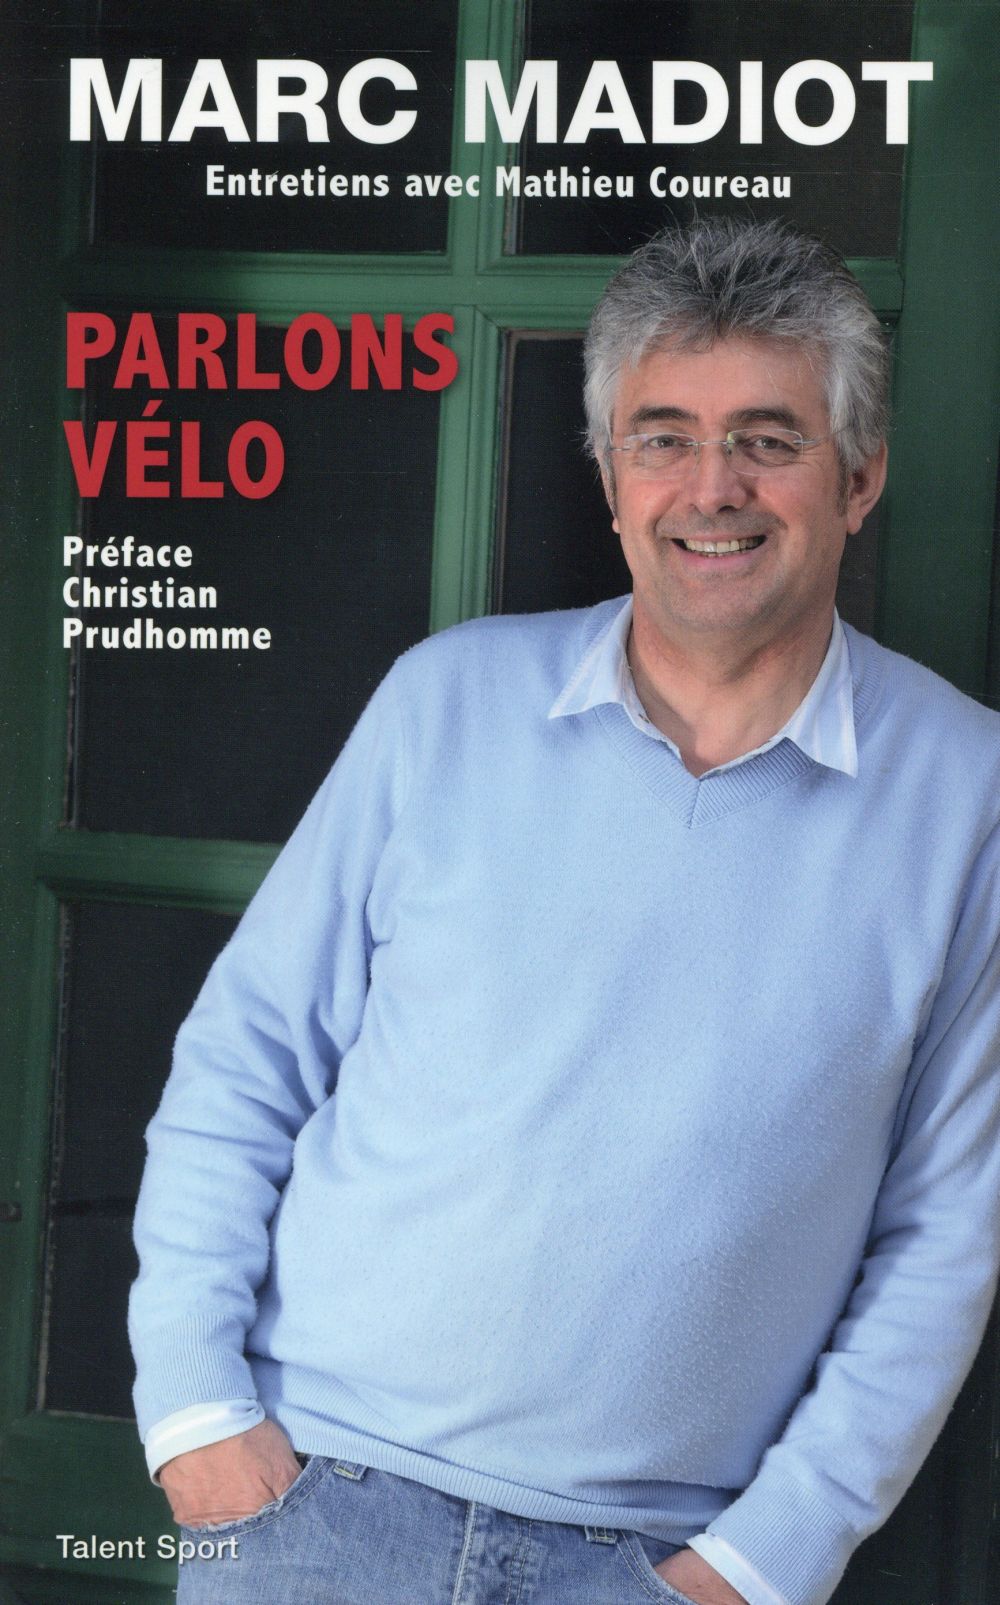 MARC MADIOT PARLONS VELO